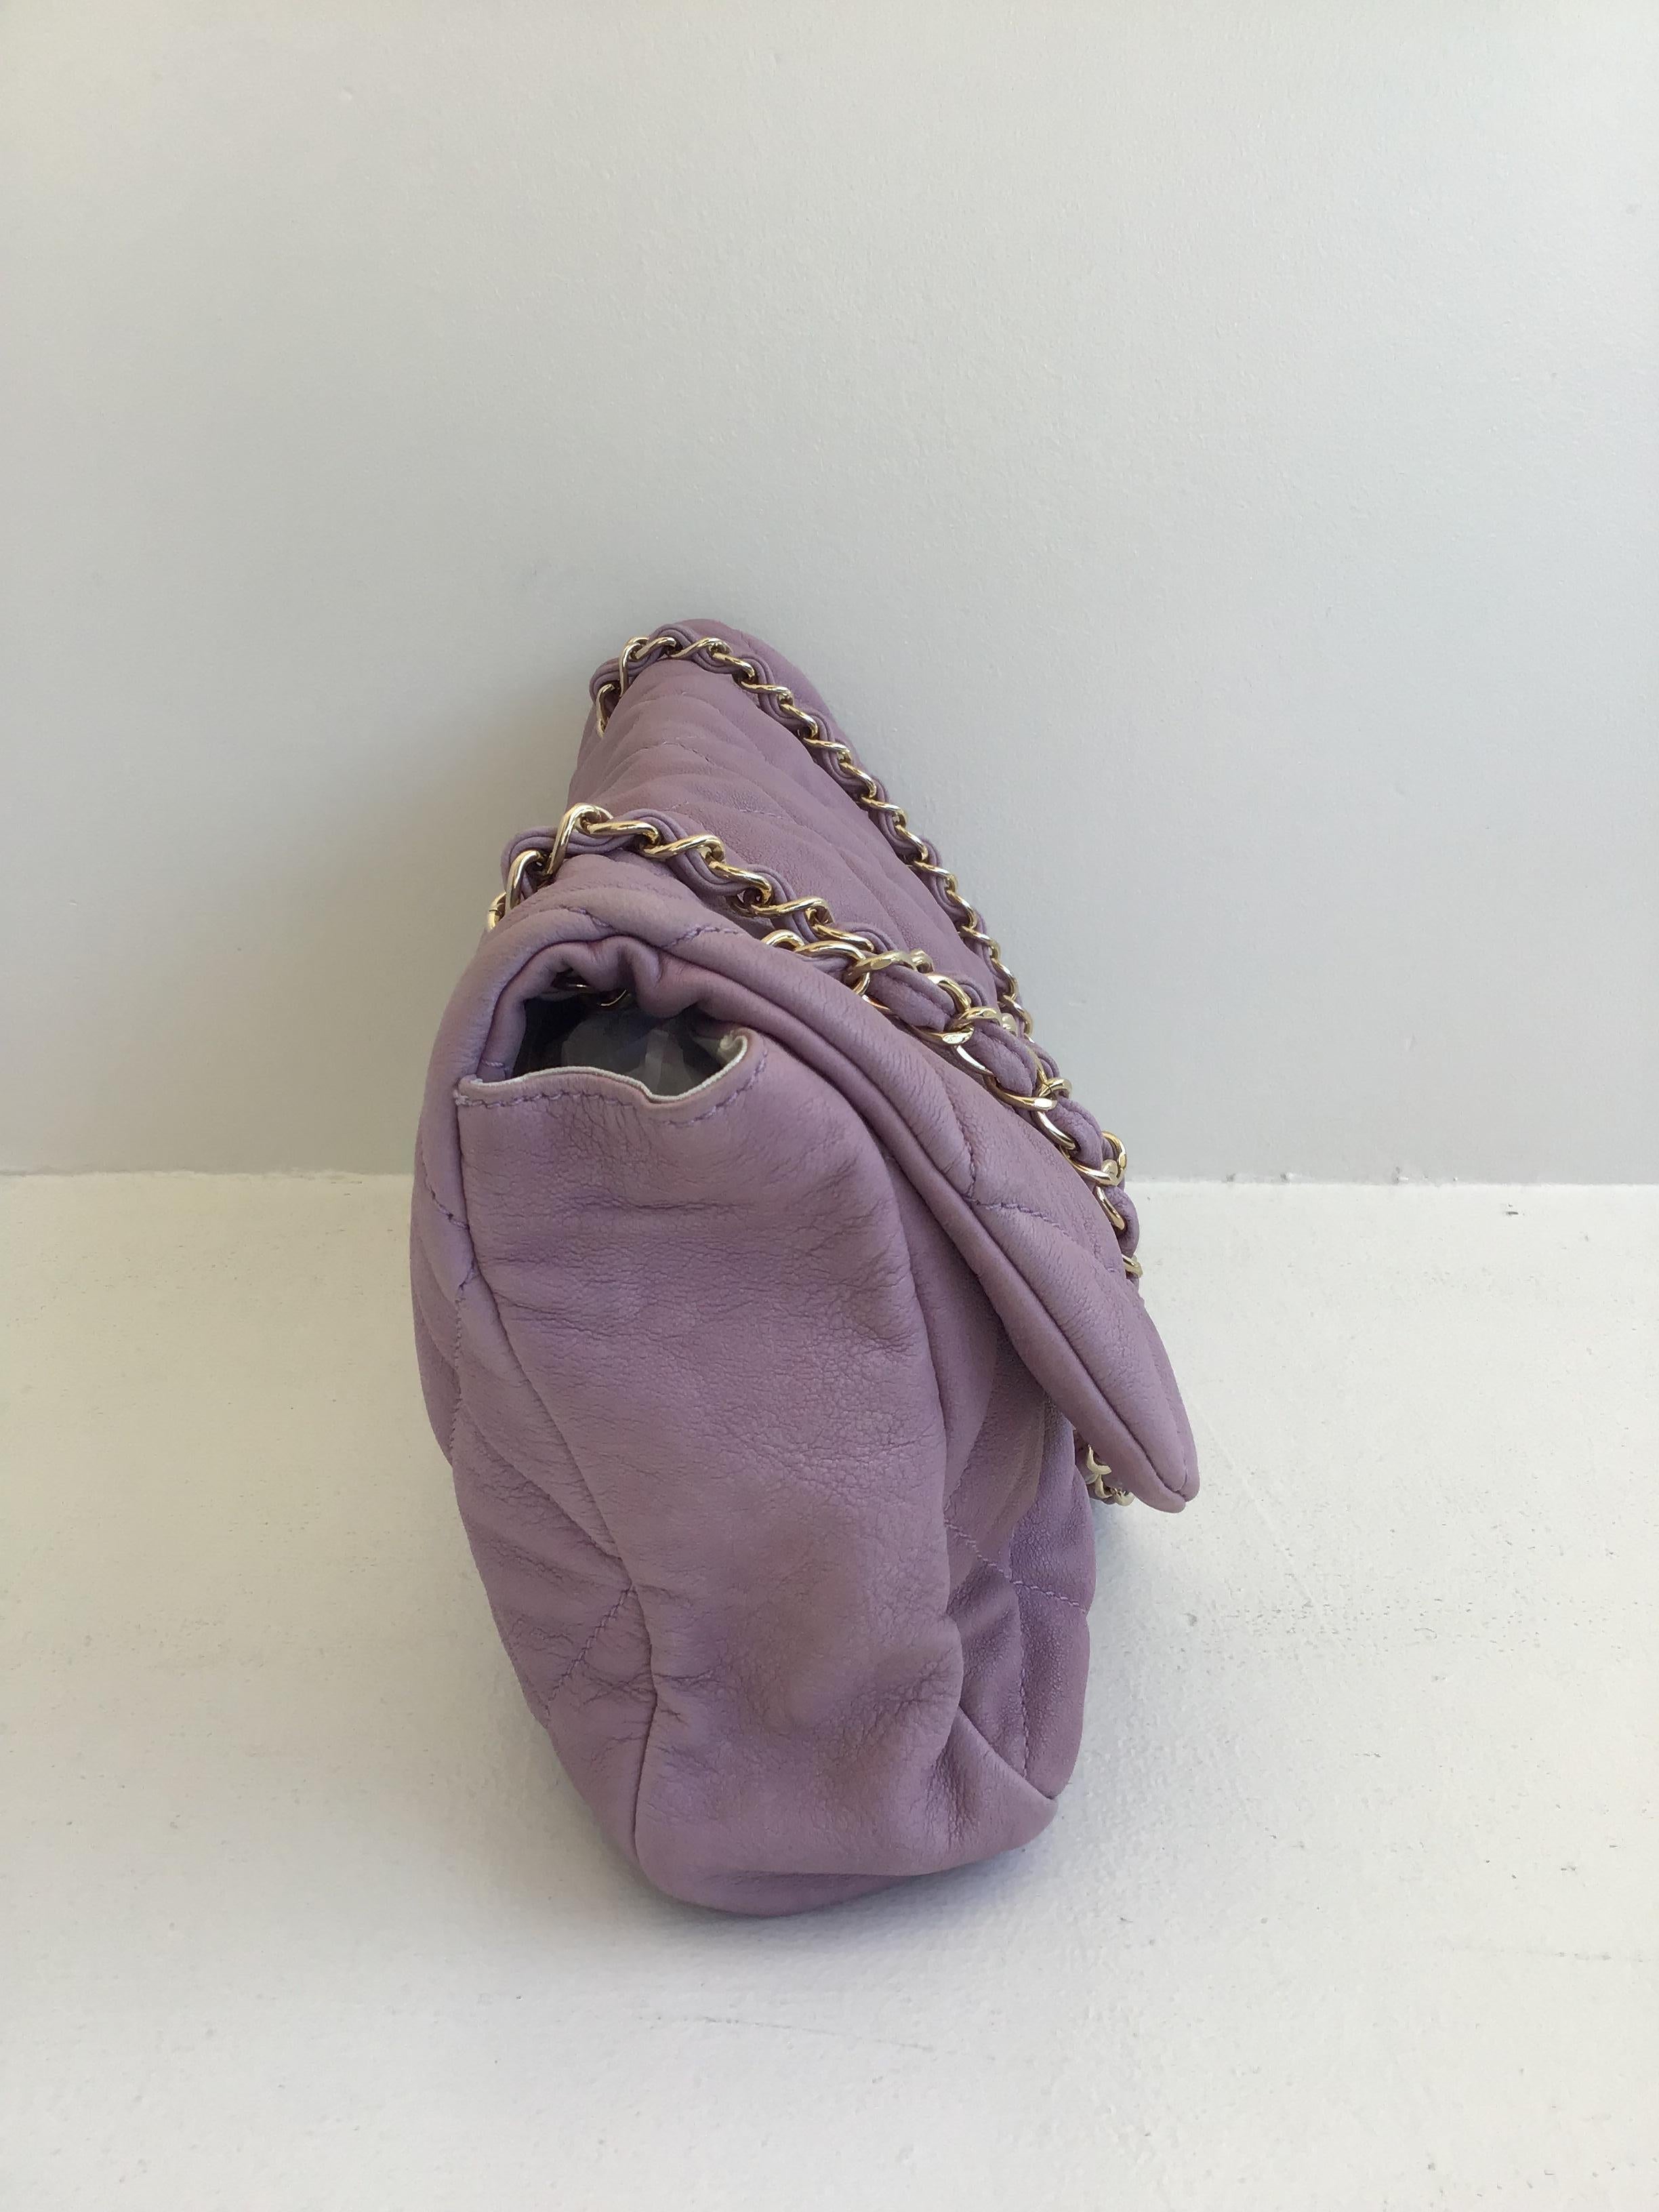 Gray Chanel Lavender Flap Purse with Gold Hardware, Size Medium